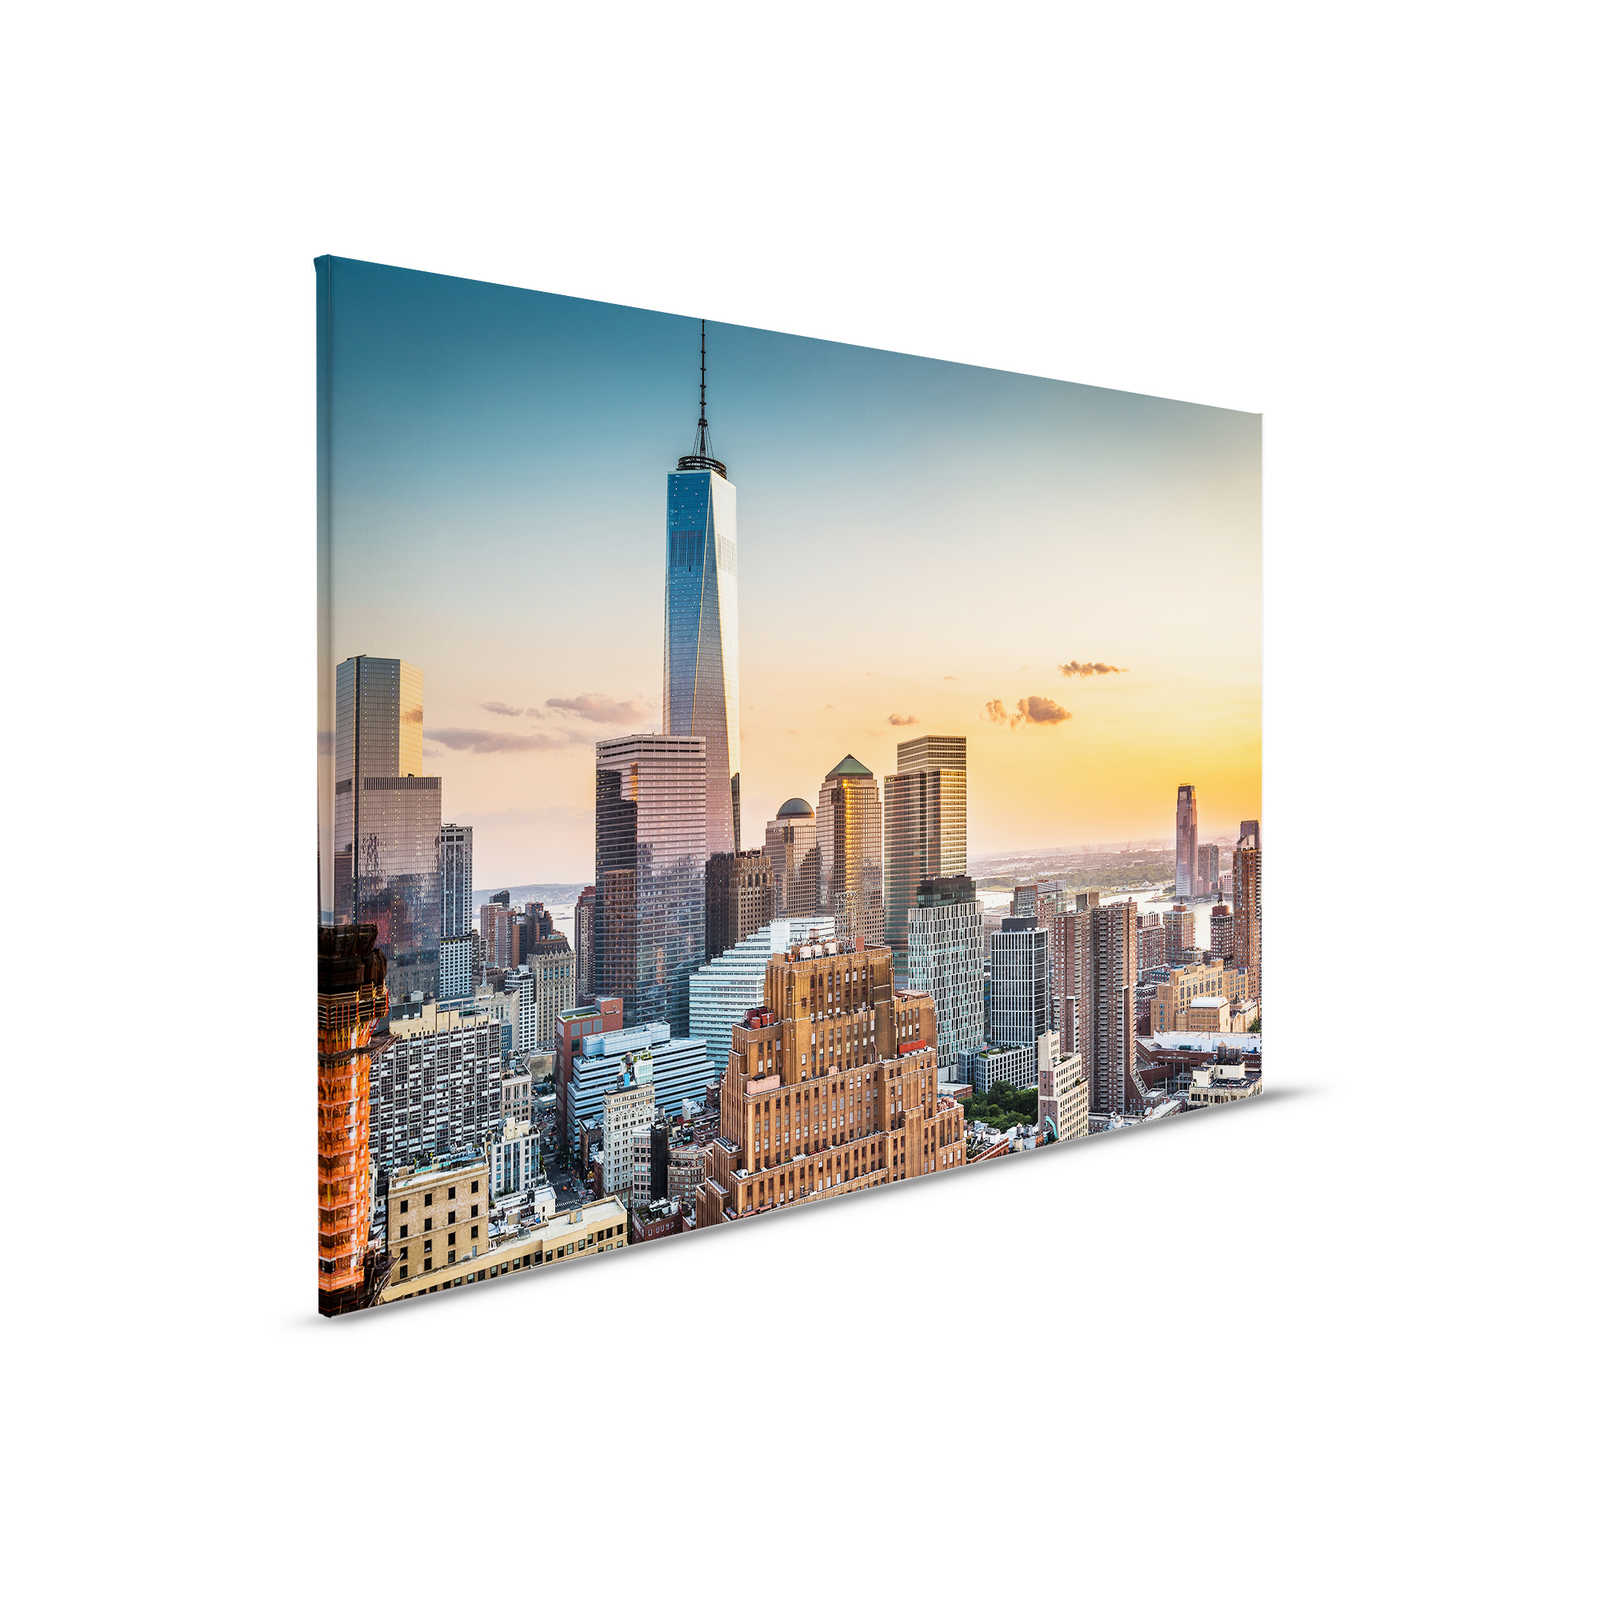         Canvas painting with Manhattan skyline at sunset - 0.90 m x 0.60 m
    